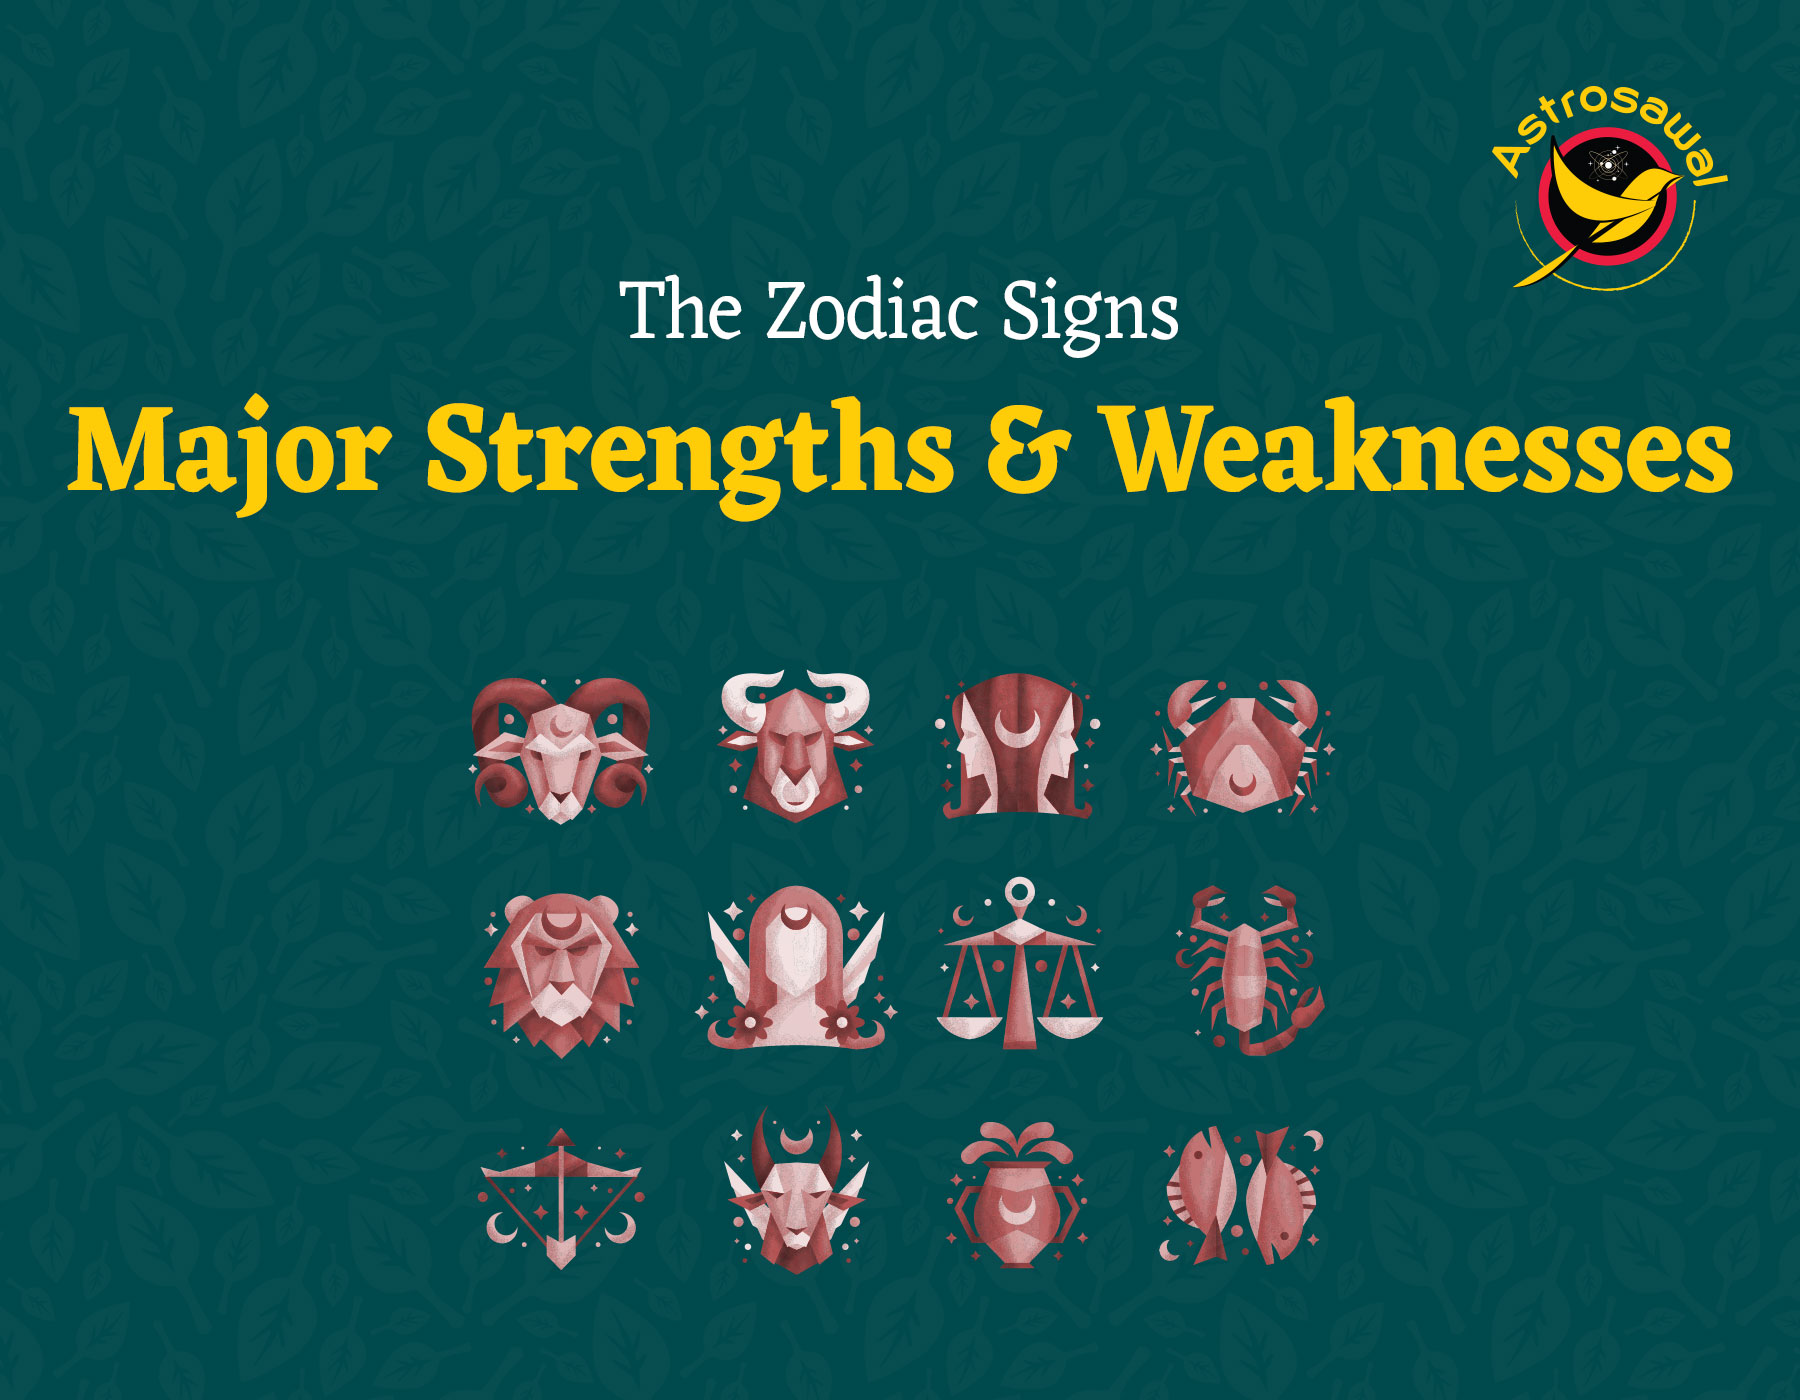 The Zodiac Signs Major Strengths and Weaknesses